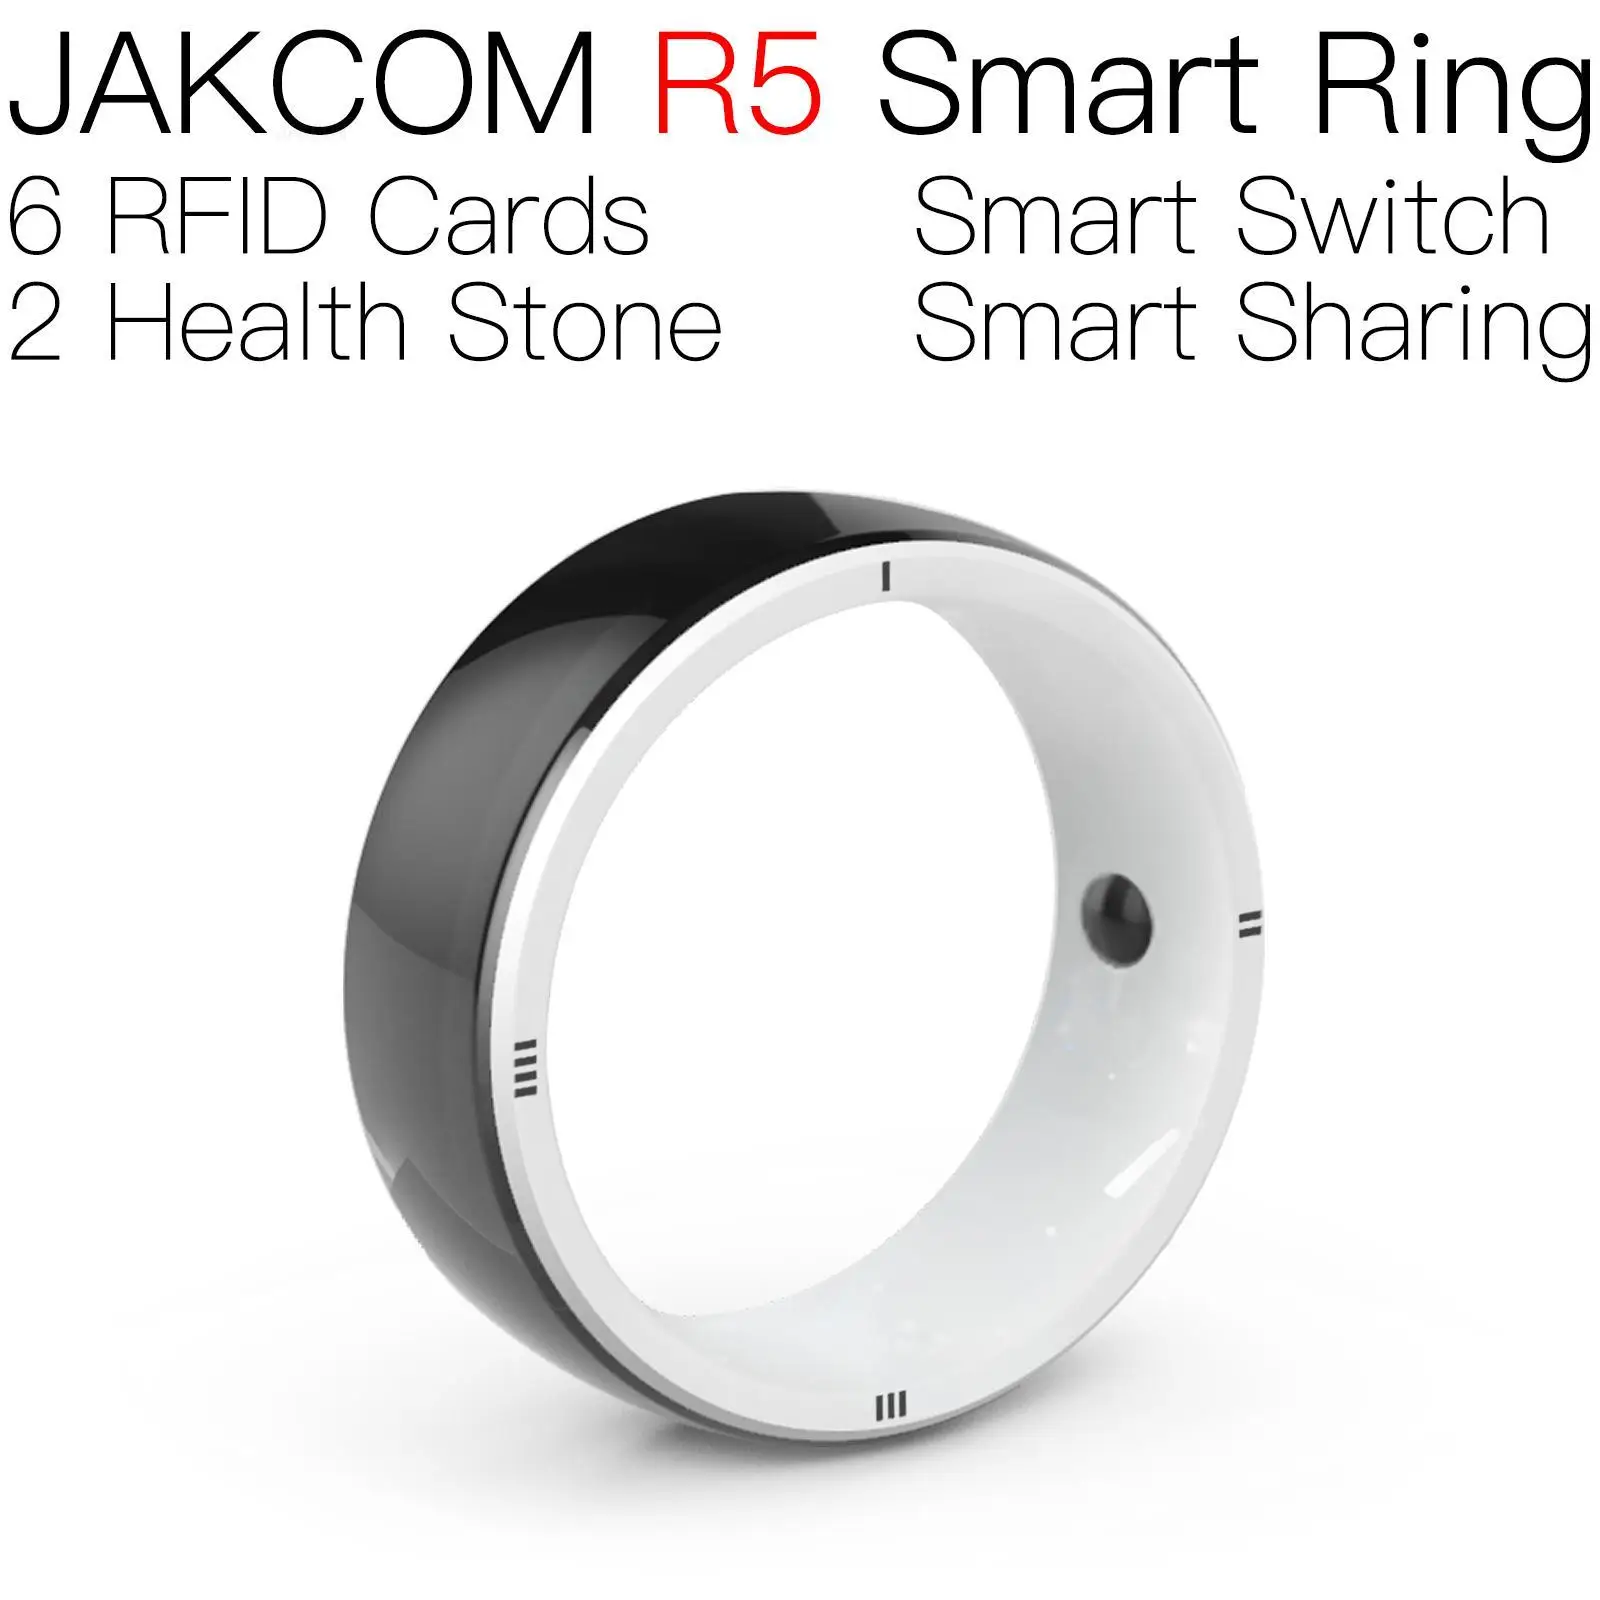 

JAKCOM R5 Smart Ring Newer than microchip animal com qrcode crossing pin id tags for animals rfid card with chip pet veterinary